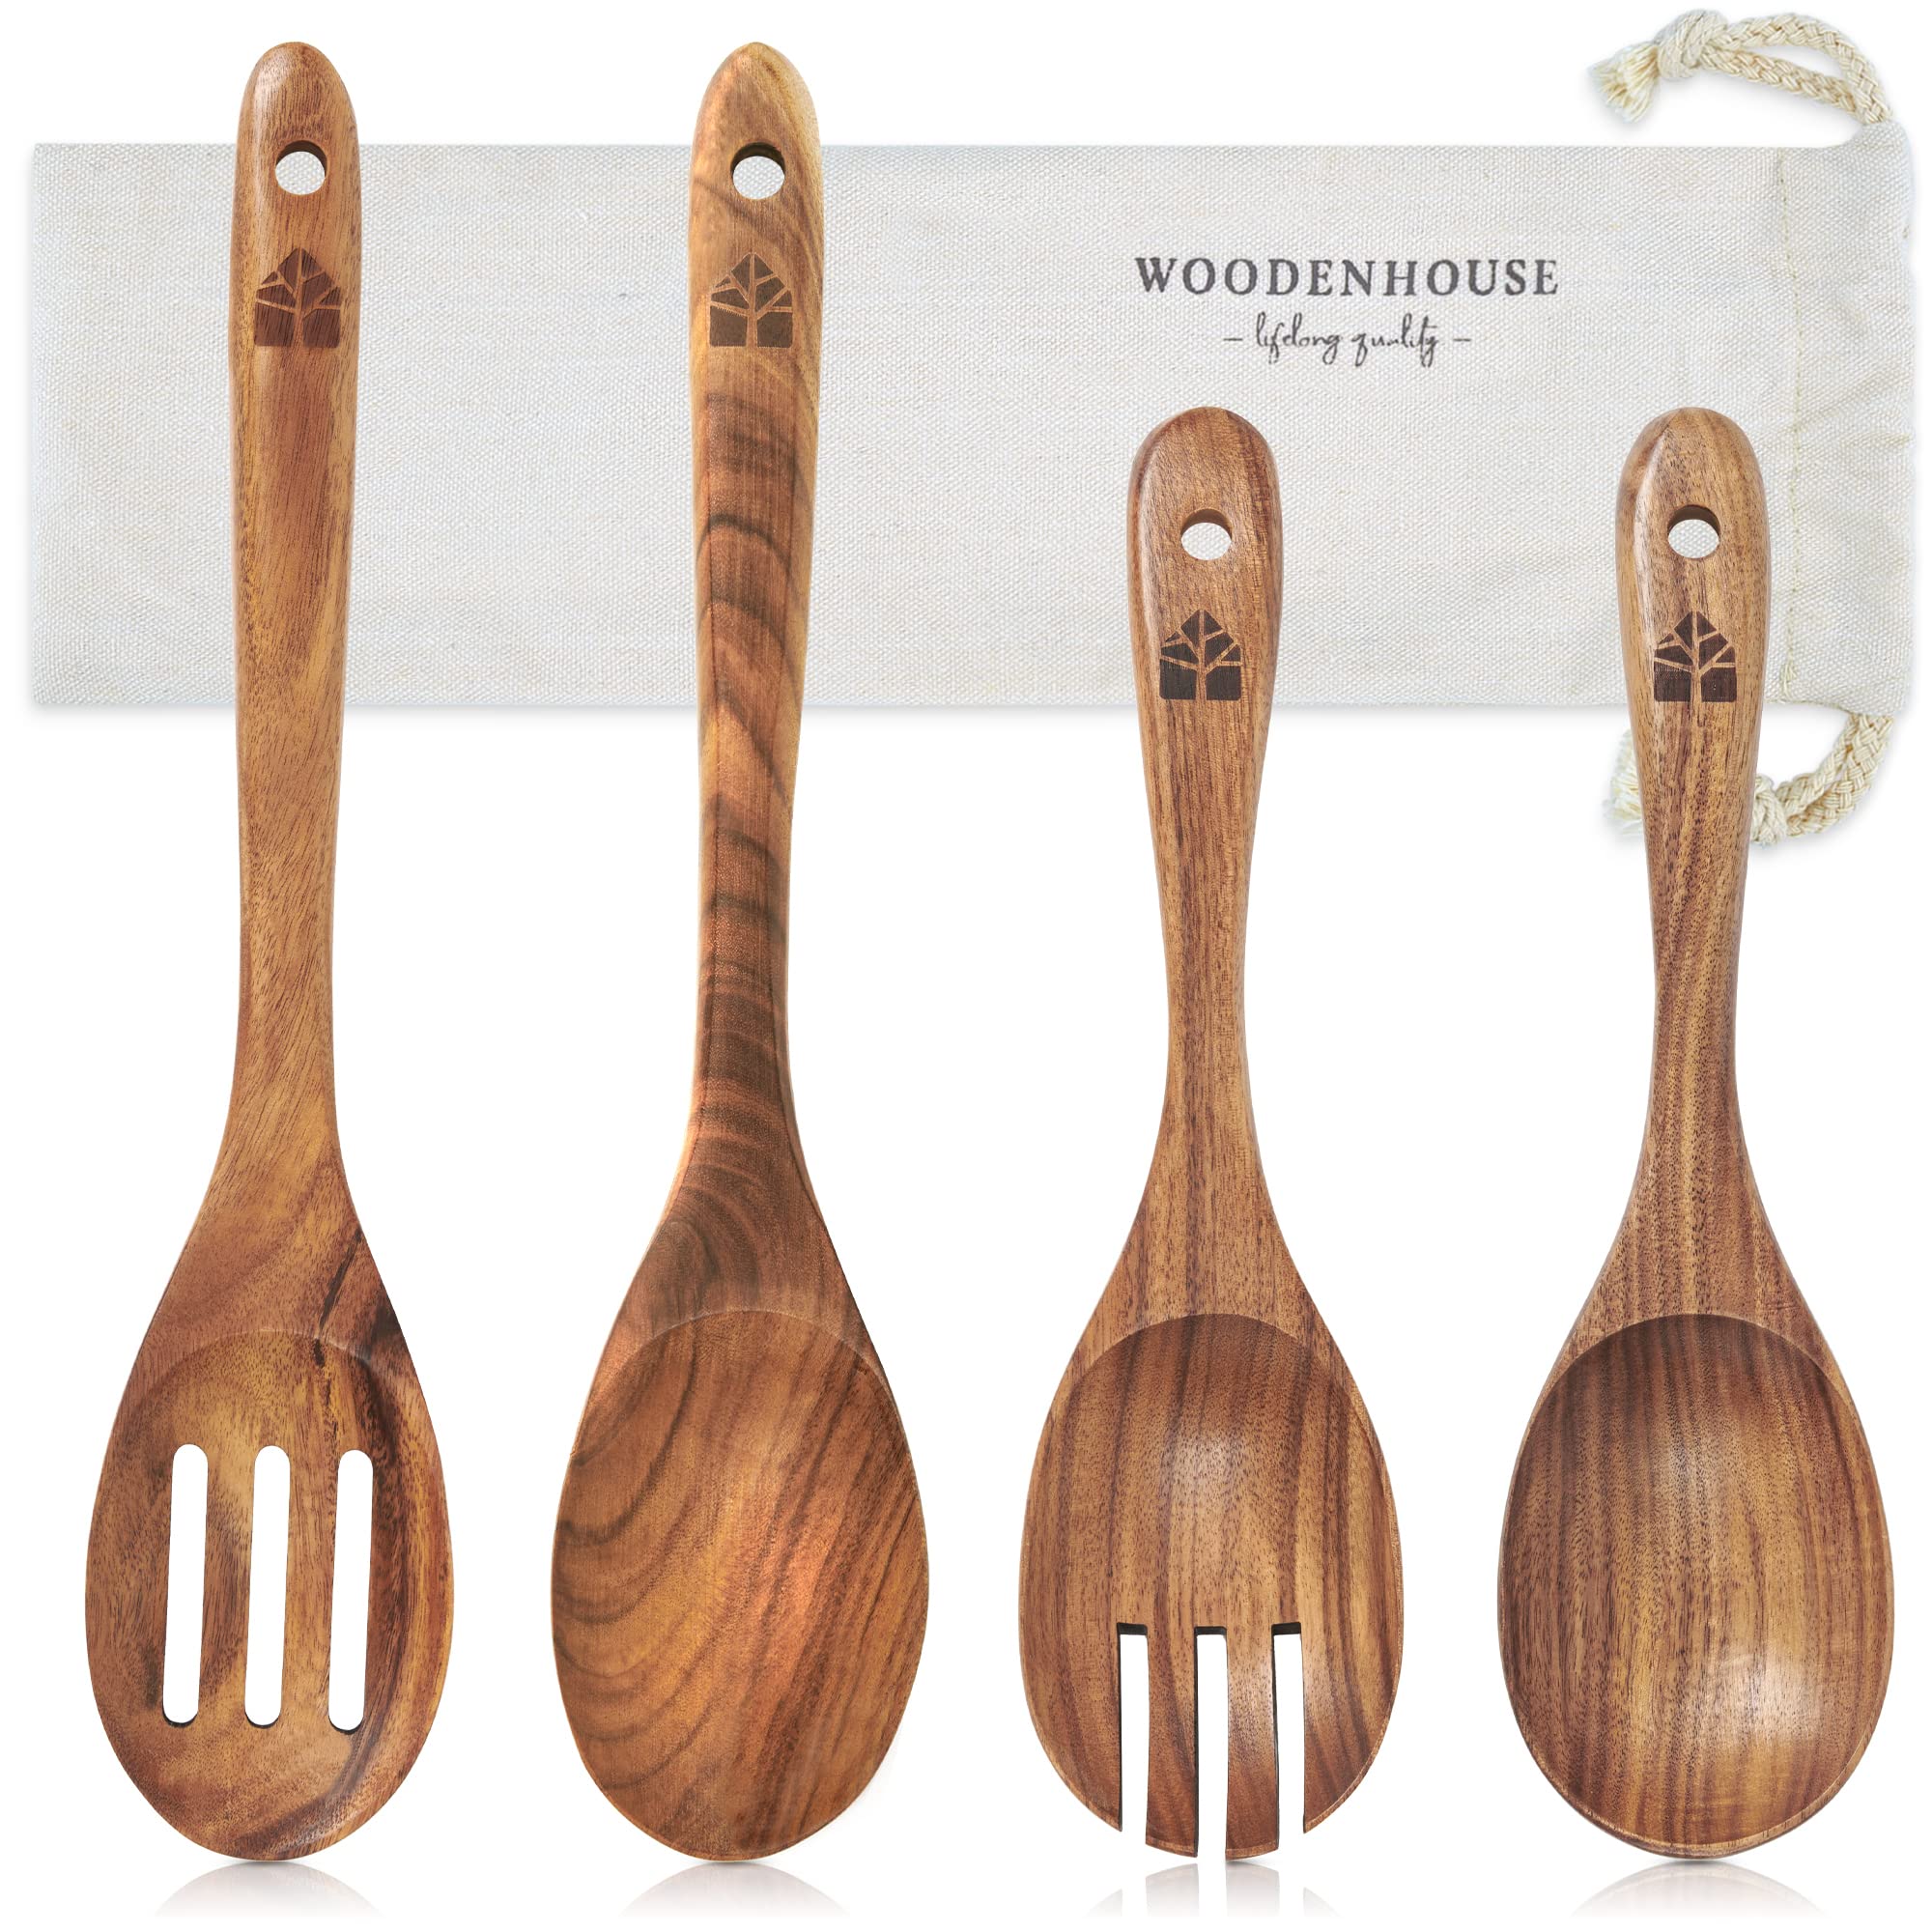  Wooden Spoons for Cooking, 10 Pcs Teak Wood Cooking Utensil Set  – Wooden Kitchen Utensils for Nonstick Pans & Cookware – Sturdy,  Lightweight & Heat Resistant: Home & Kitchen